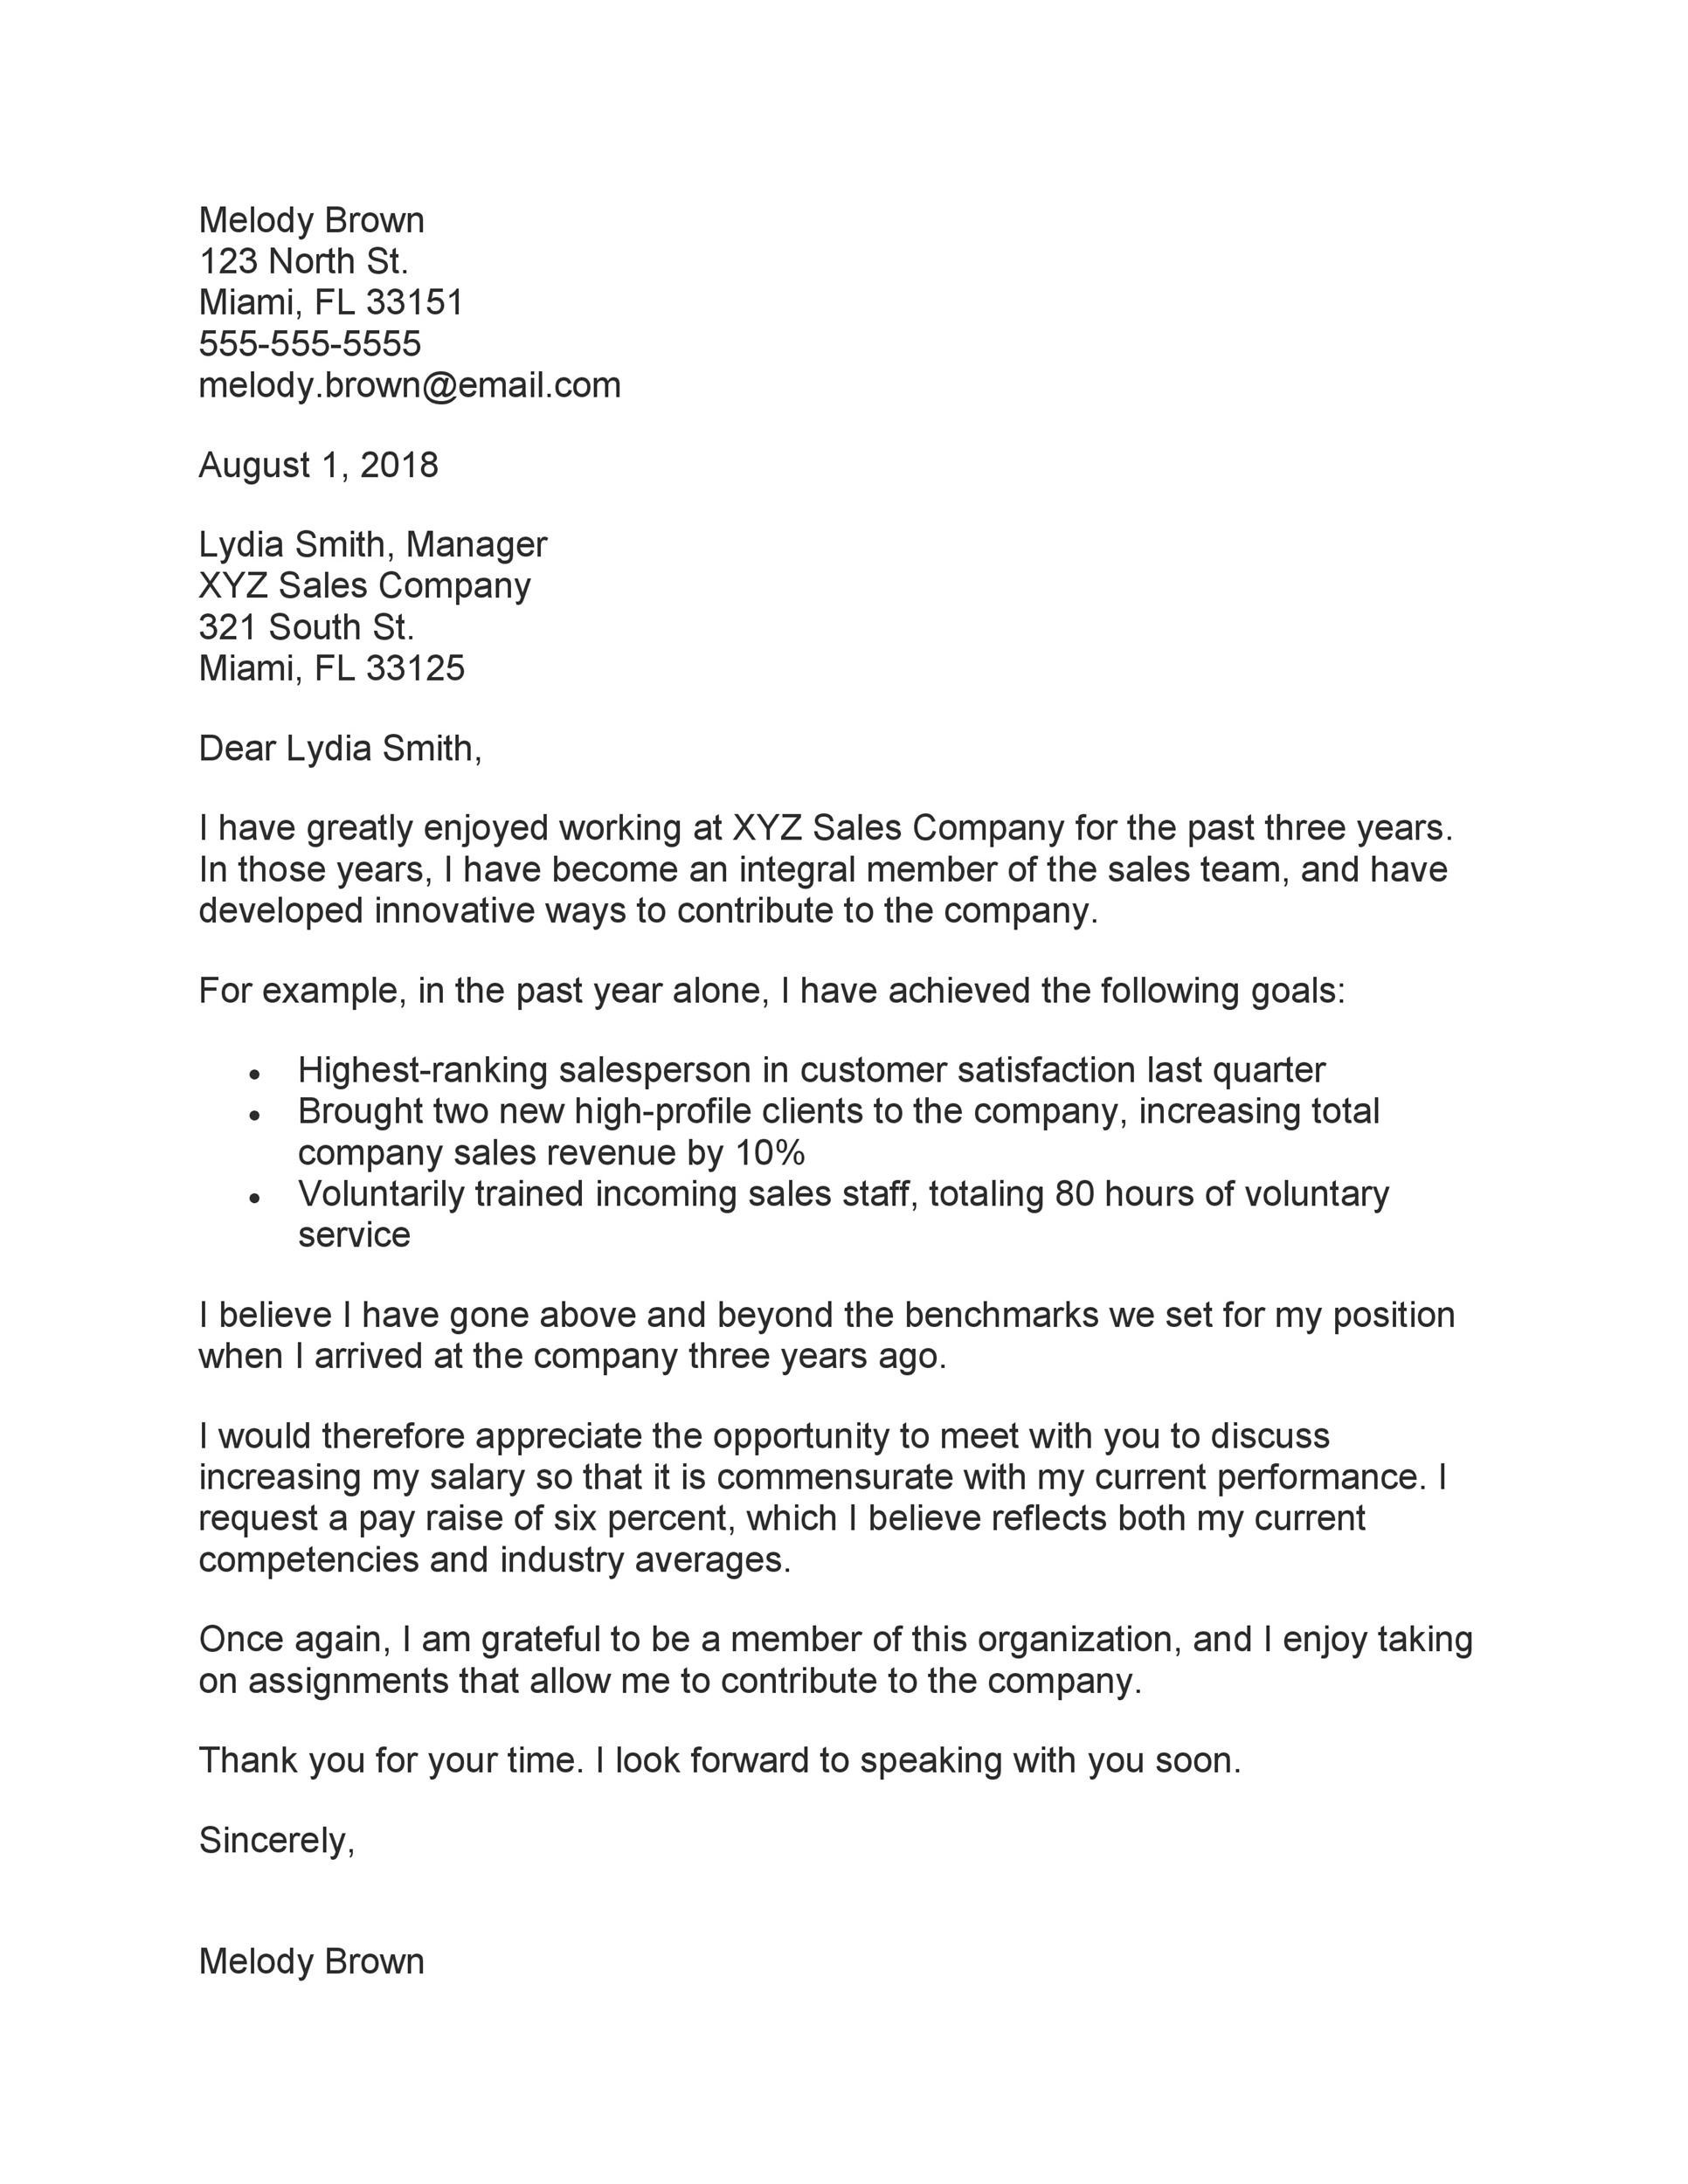 Raise Letter To Employer from templatelab.com